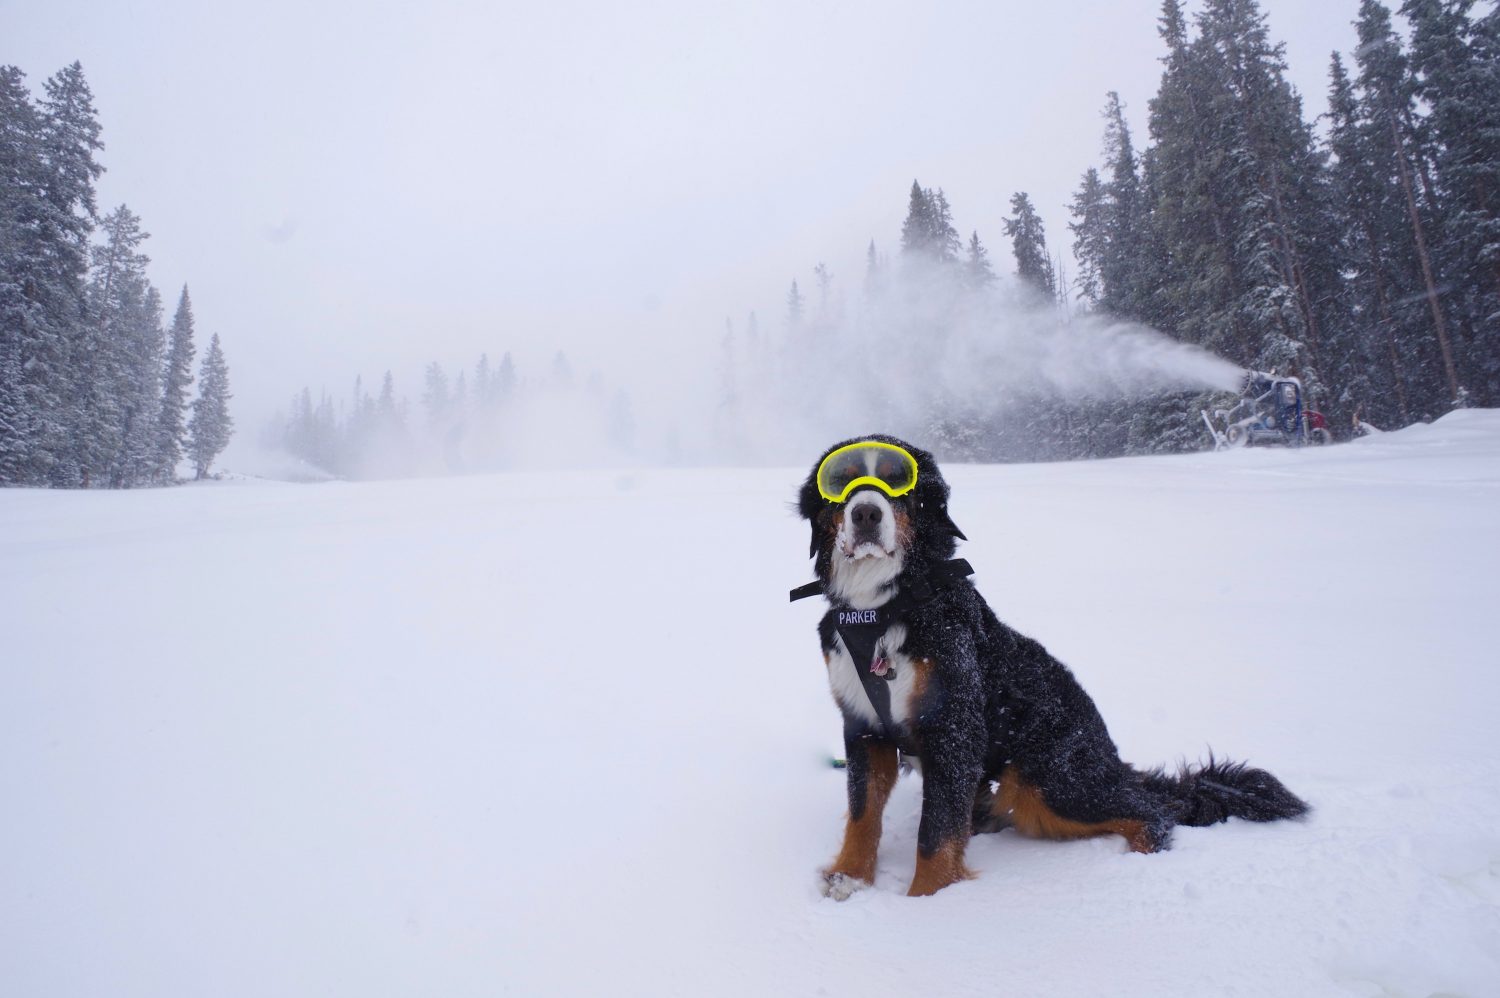 Loveland Ski Area - Powder Dogs, Powder Alliance. This photo is from the other side of the pond, but isn't this dog beautiful? EU Regulations for travelling with your dog if we have a 'No Deal Brexit'. 